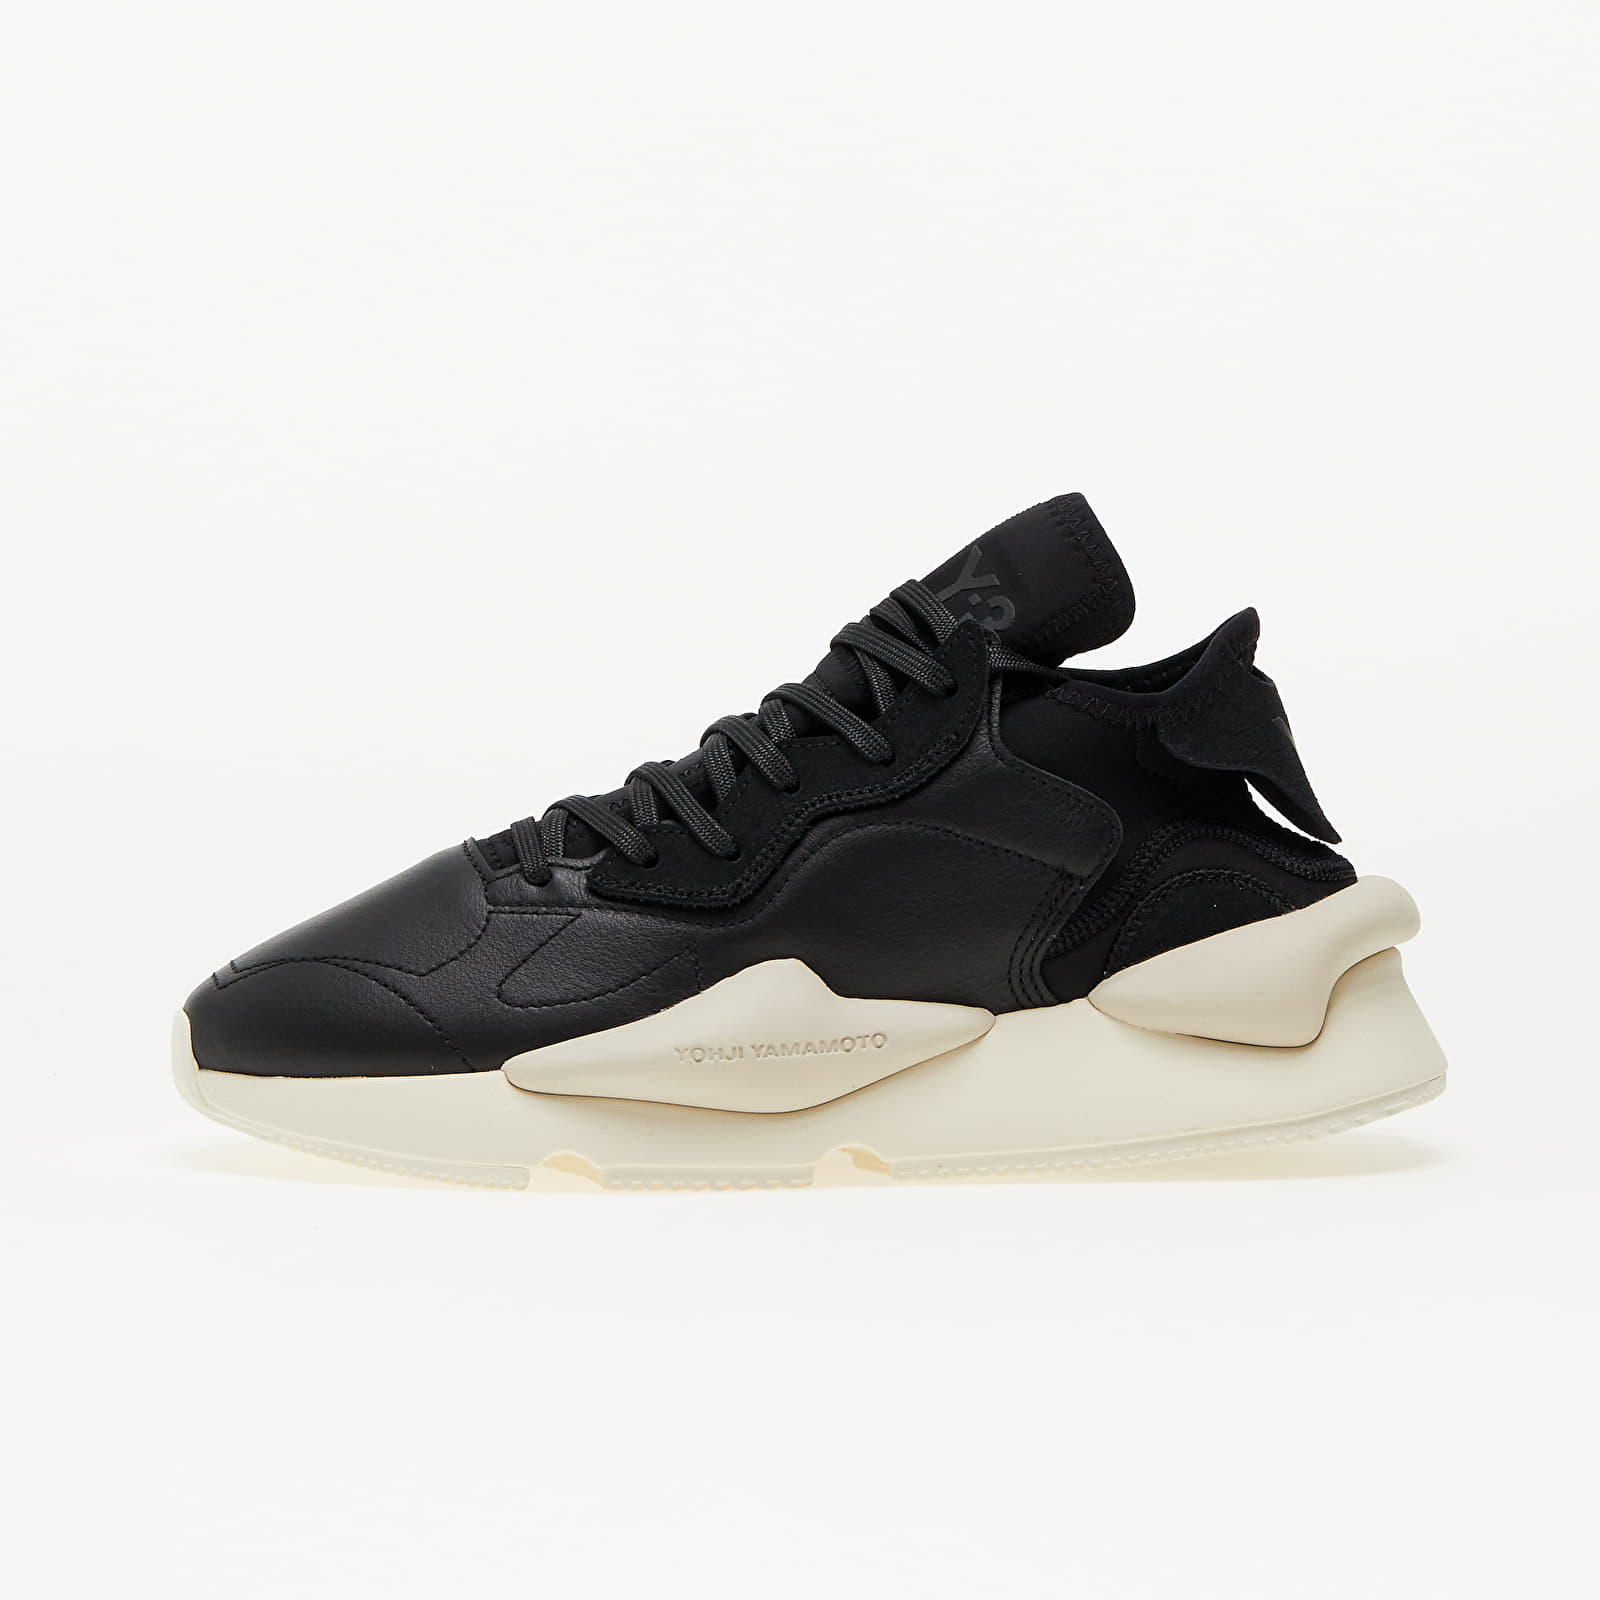 Men's shoes Y-3 Kaiwa Black/ Off White/ Clear Brown